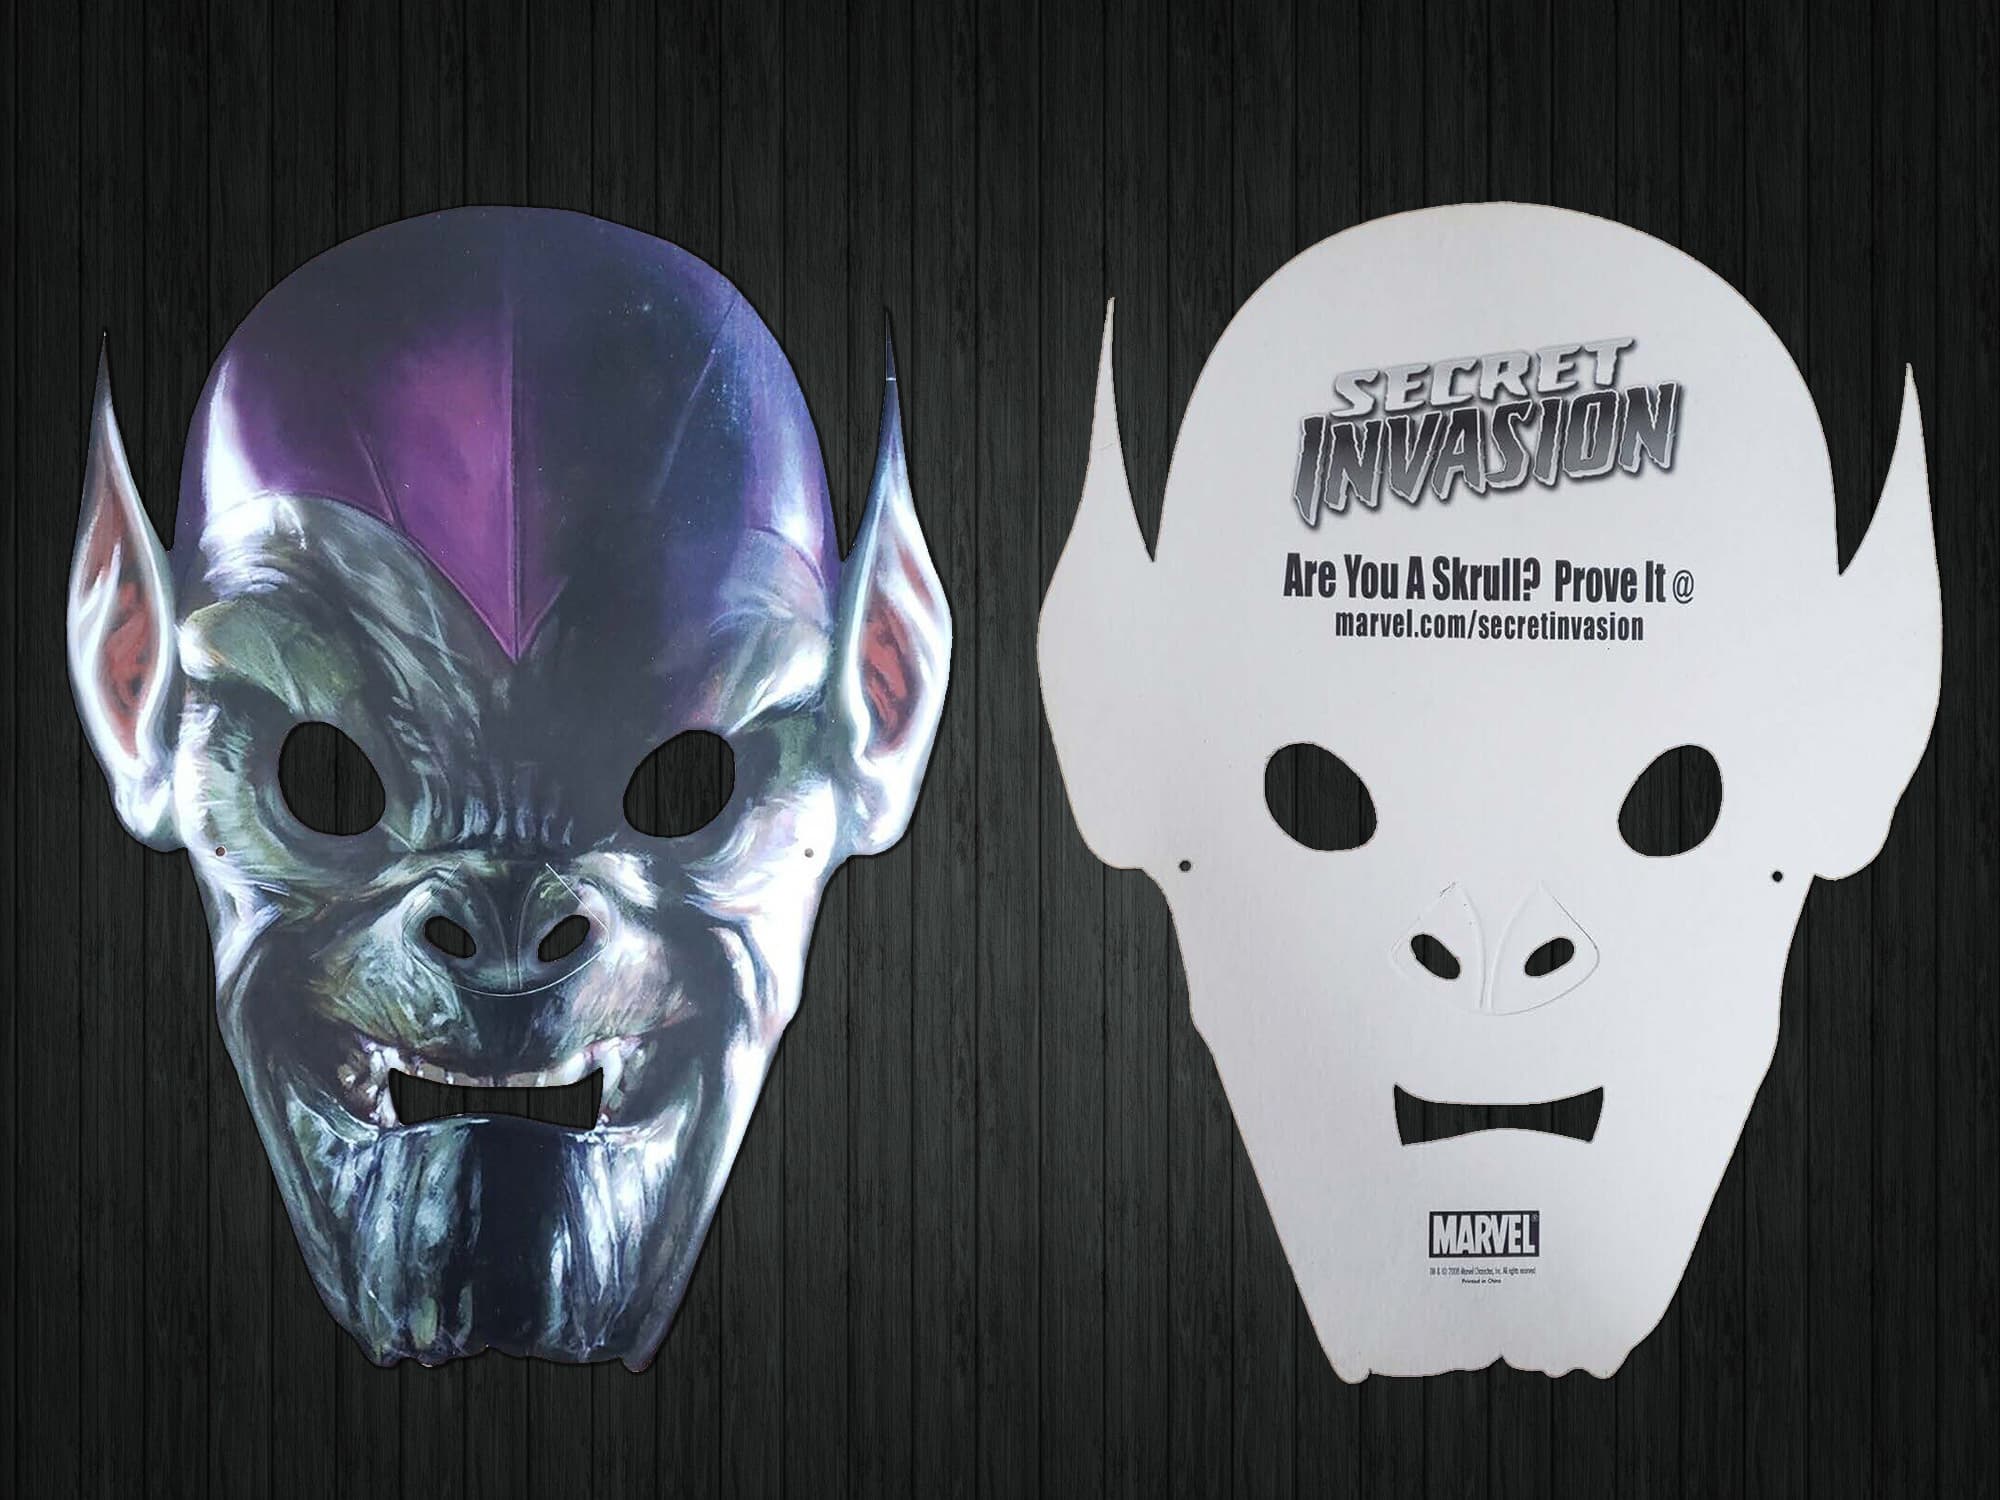 Promotional Skrull Masks That Were Given Away at Conventions